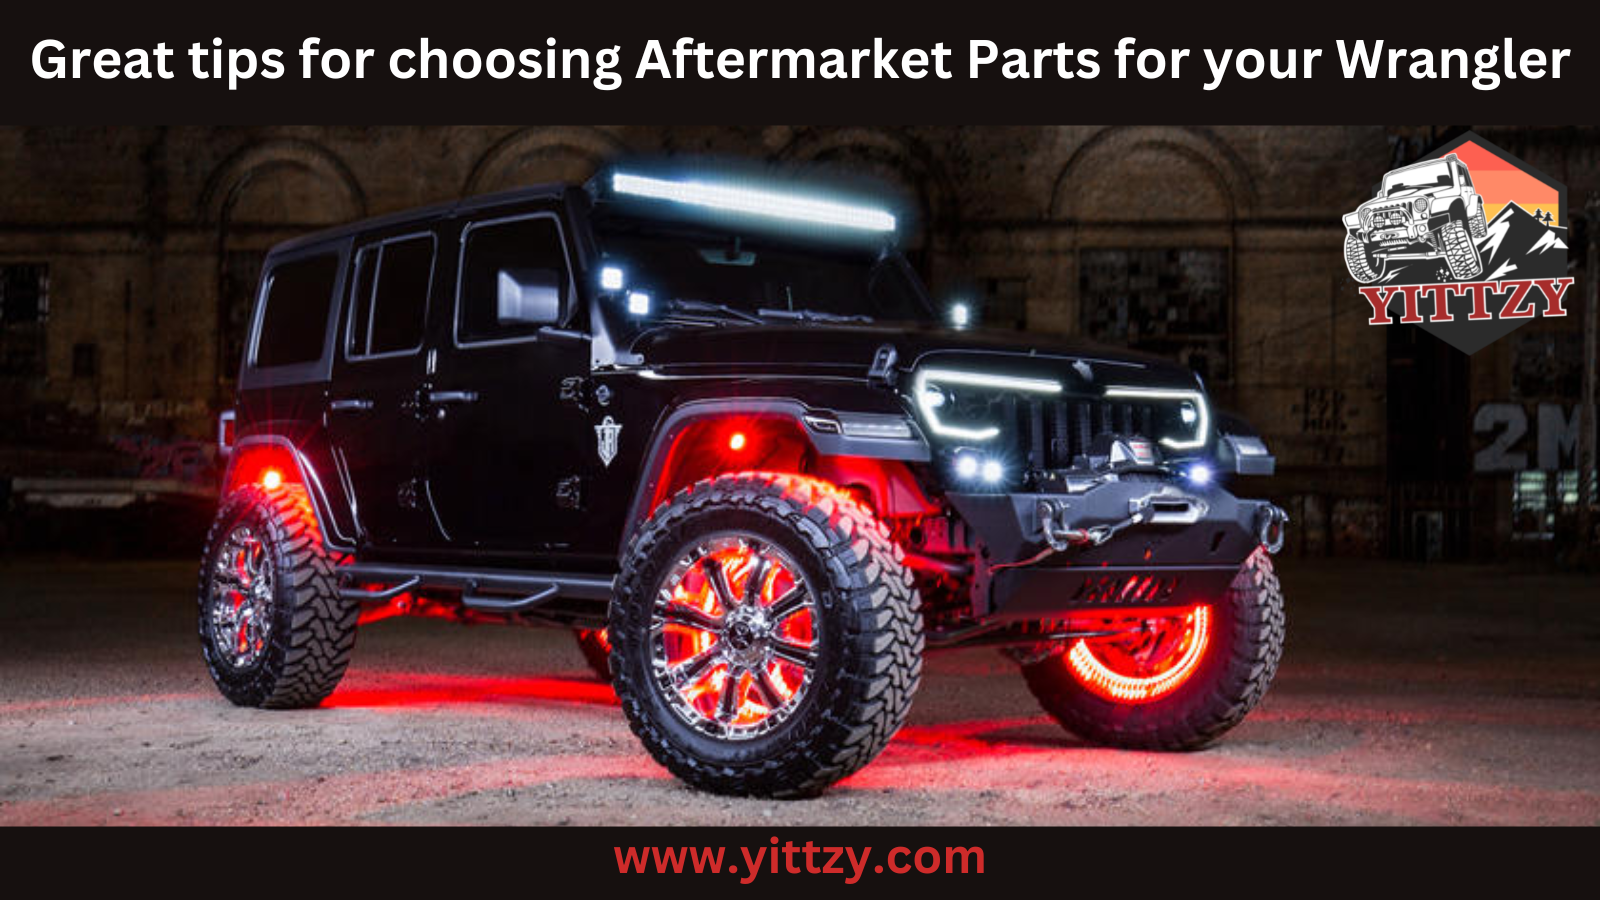 Great tips for choosing aftermarket parts for your Wrangler